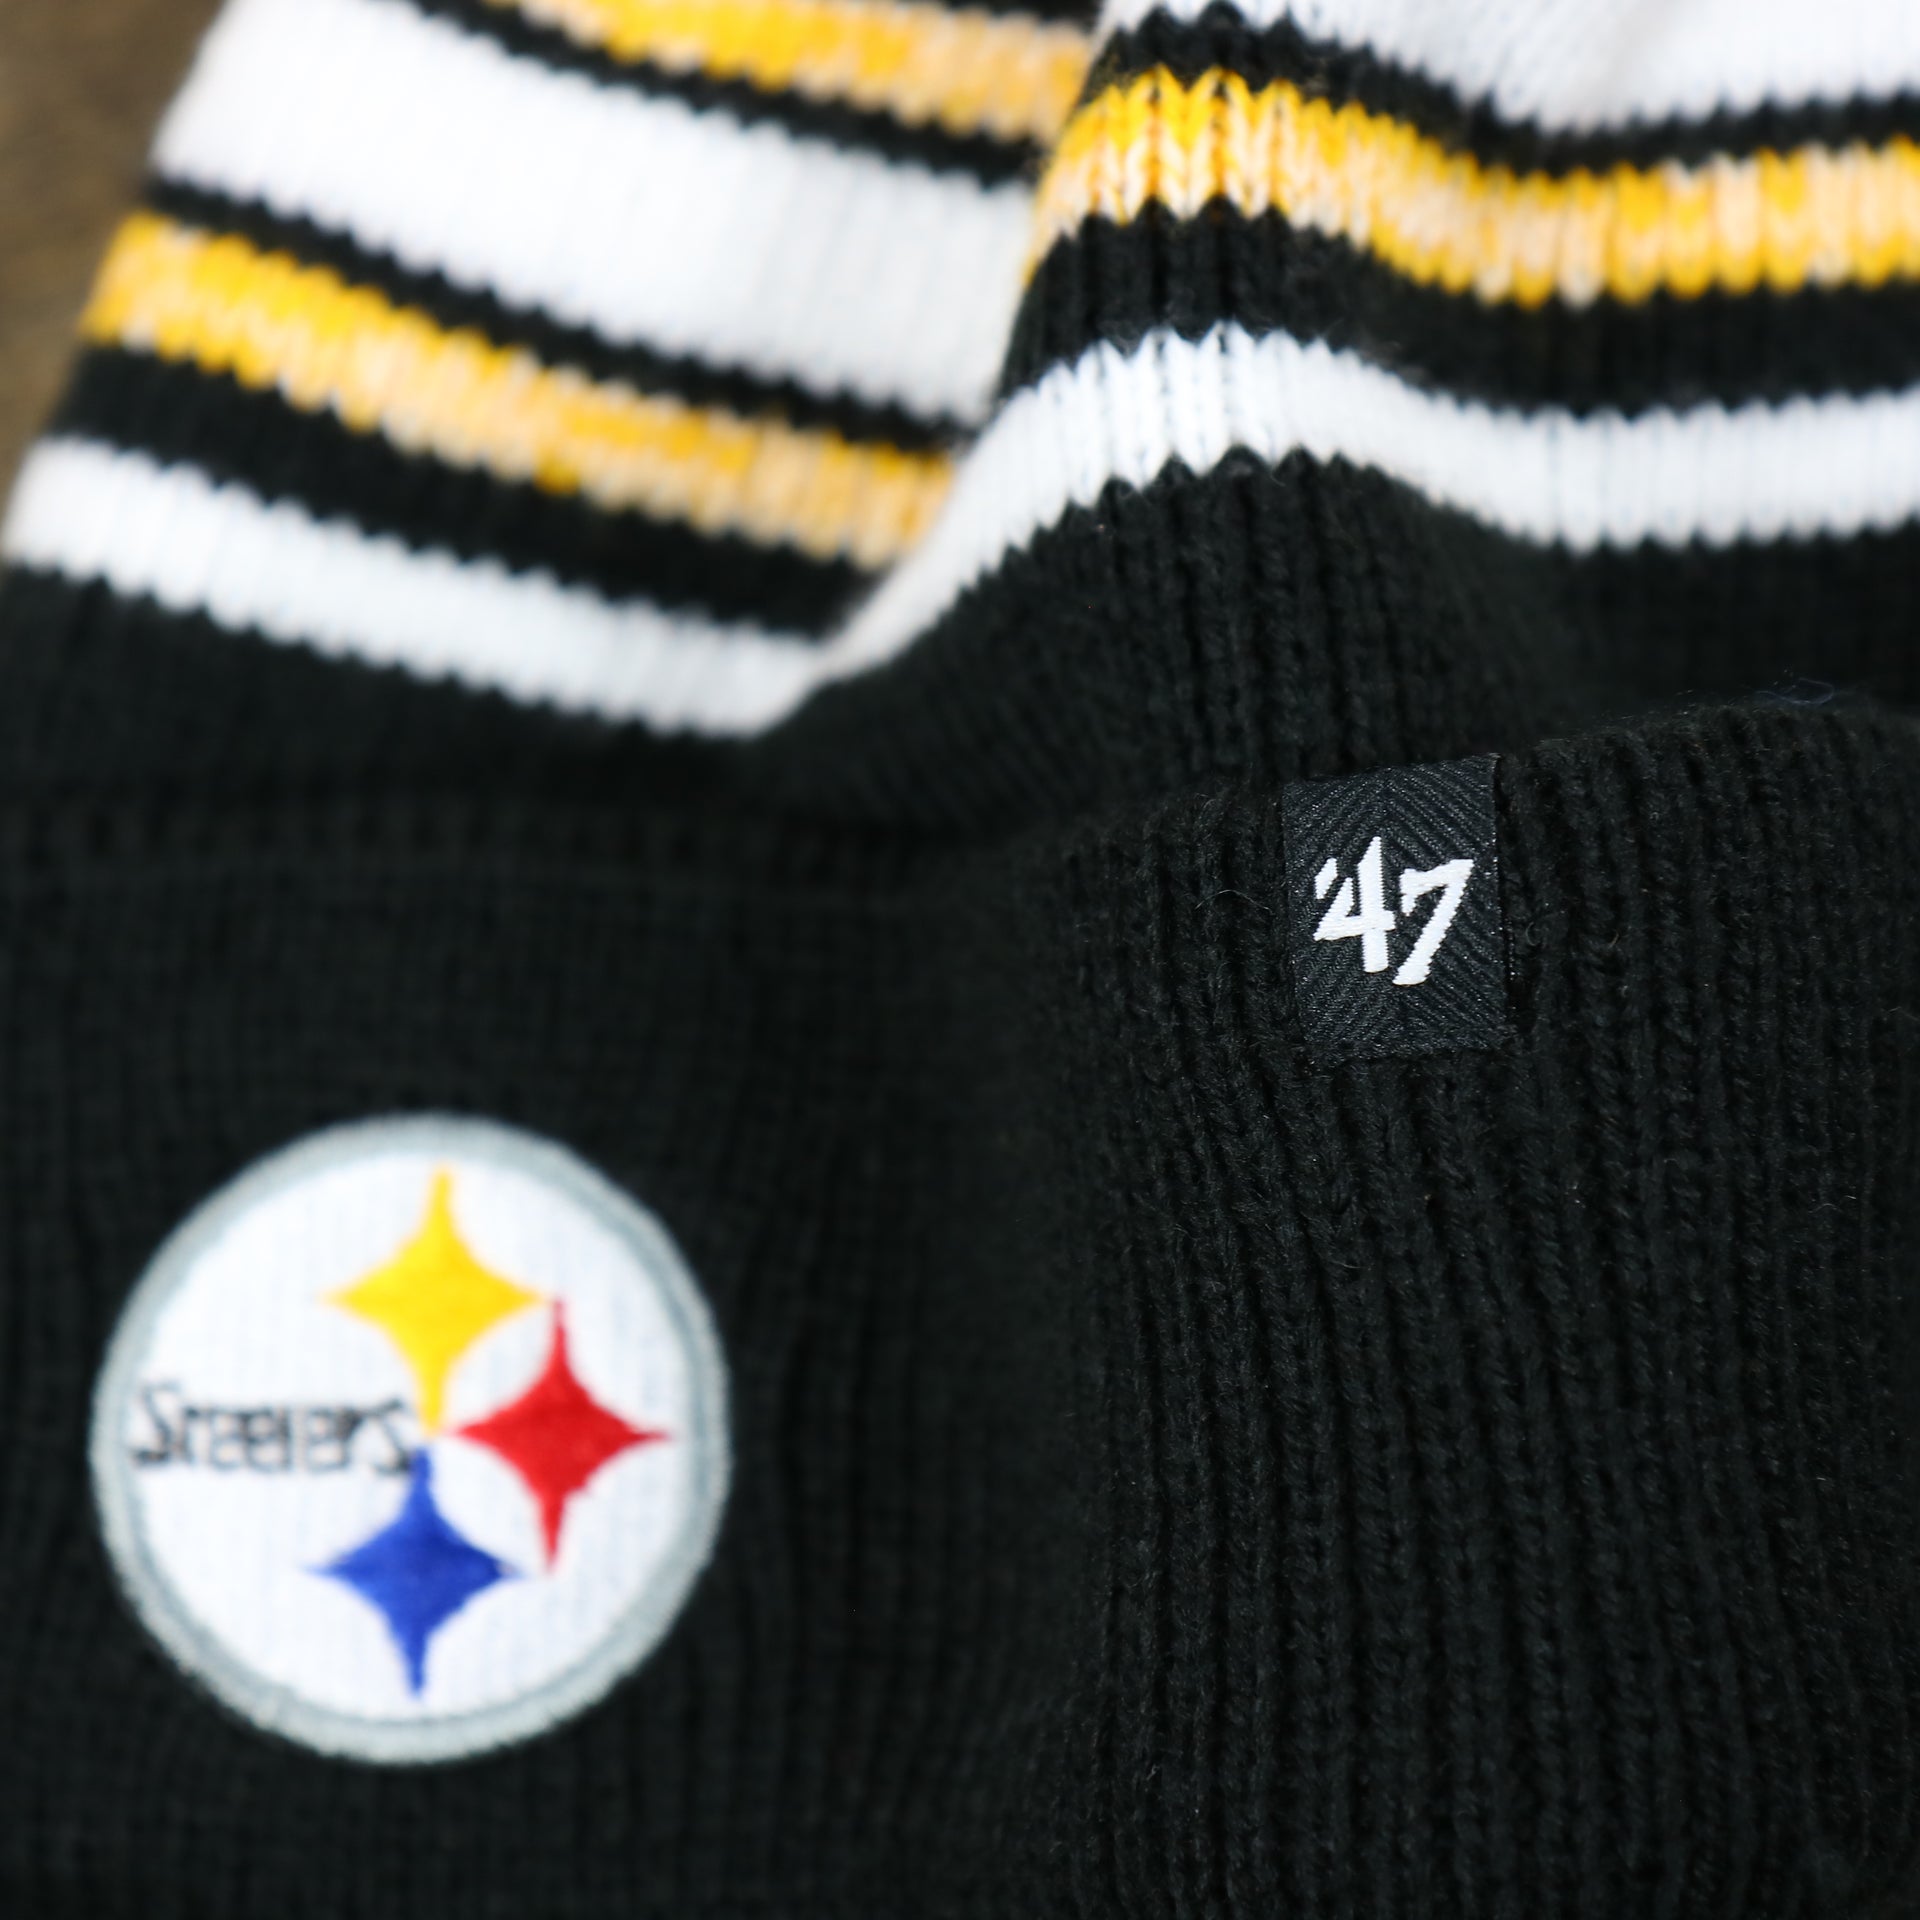 The 47 Brand Tag on the Kid’s Pittsburgh Steelers Striped Pom Pom Winter Beanie | Black, Yellow, And White Beanie